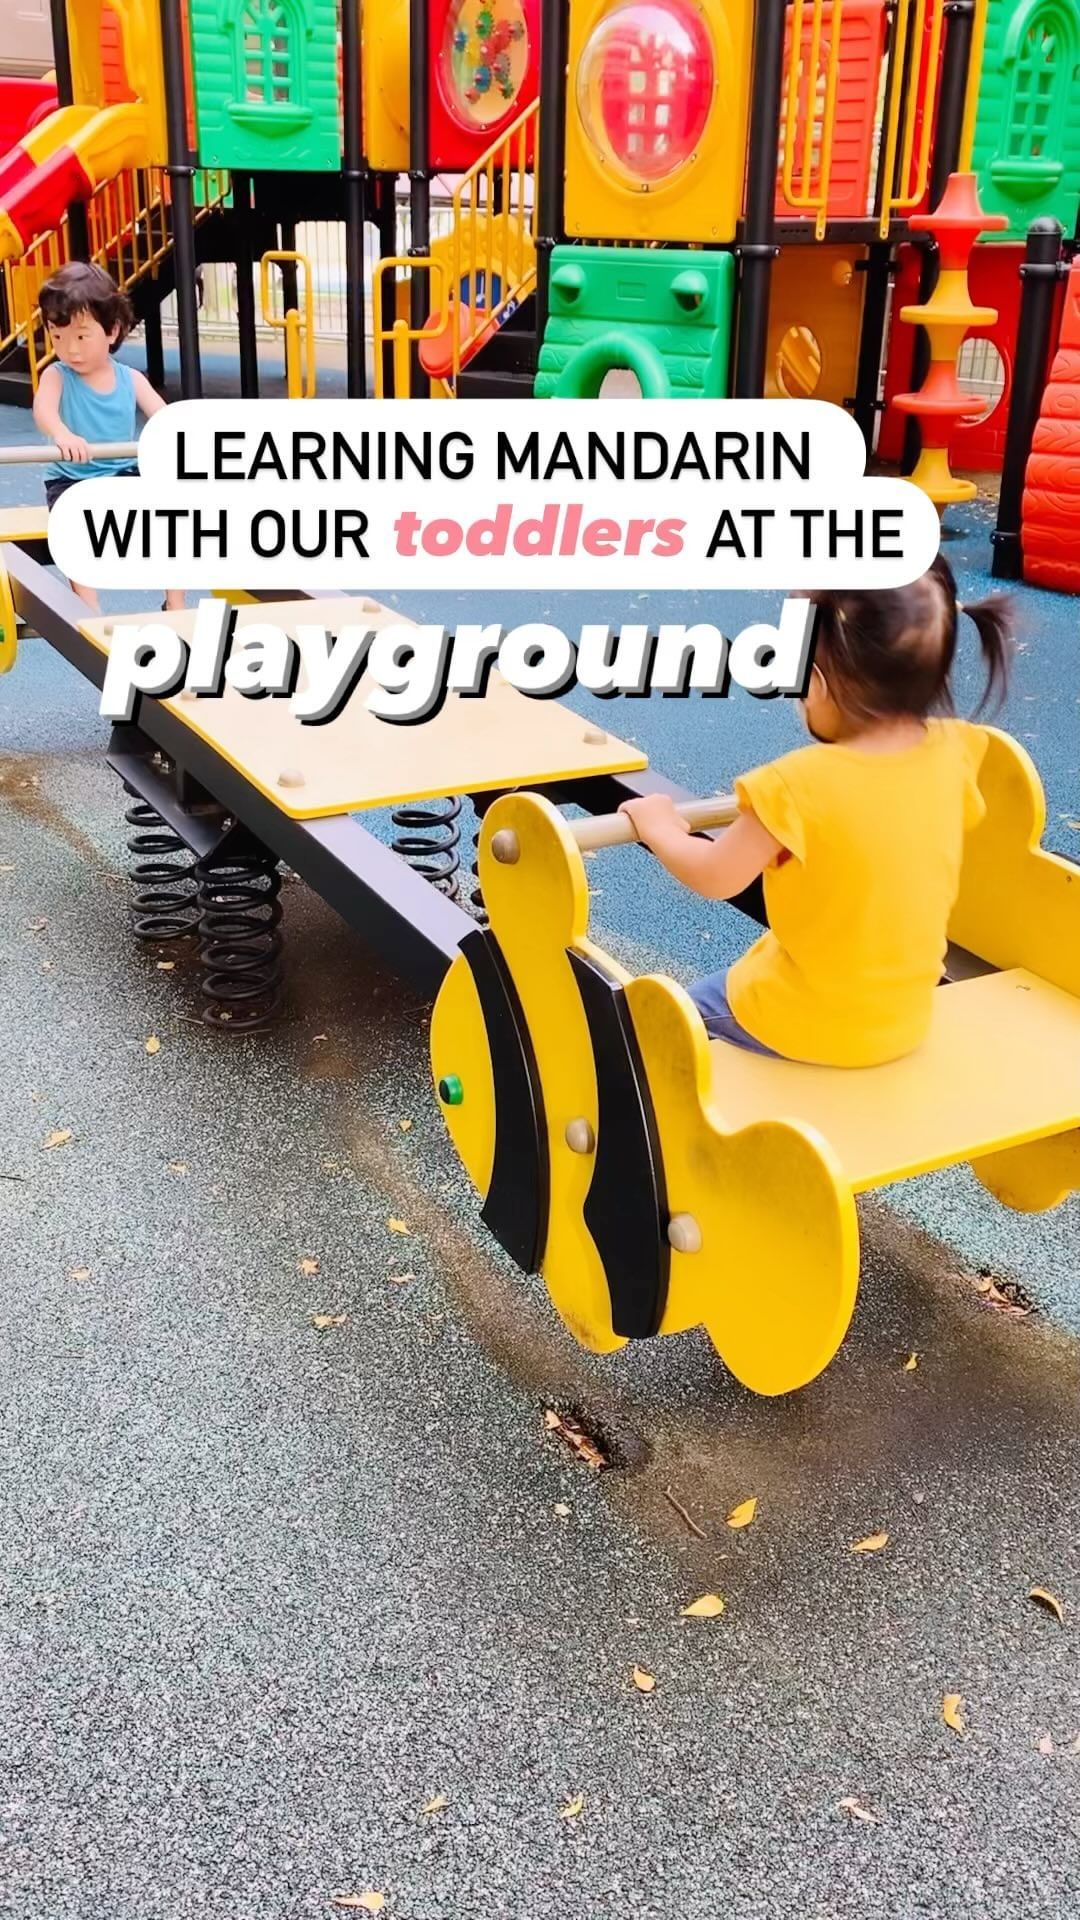 Learning Mandarin with our Toddlers at the Playground ⚽️